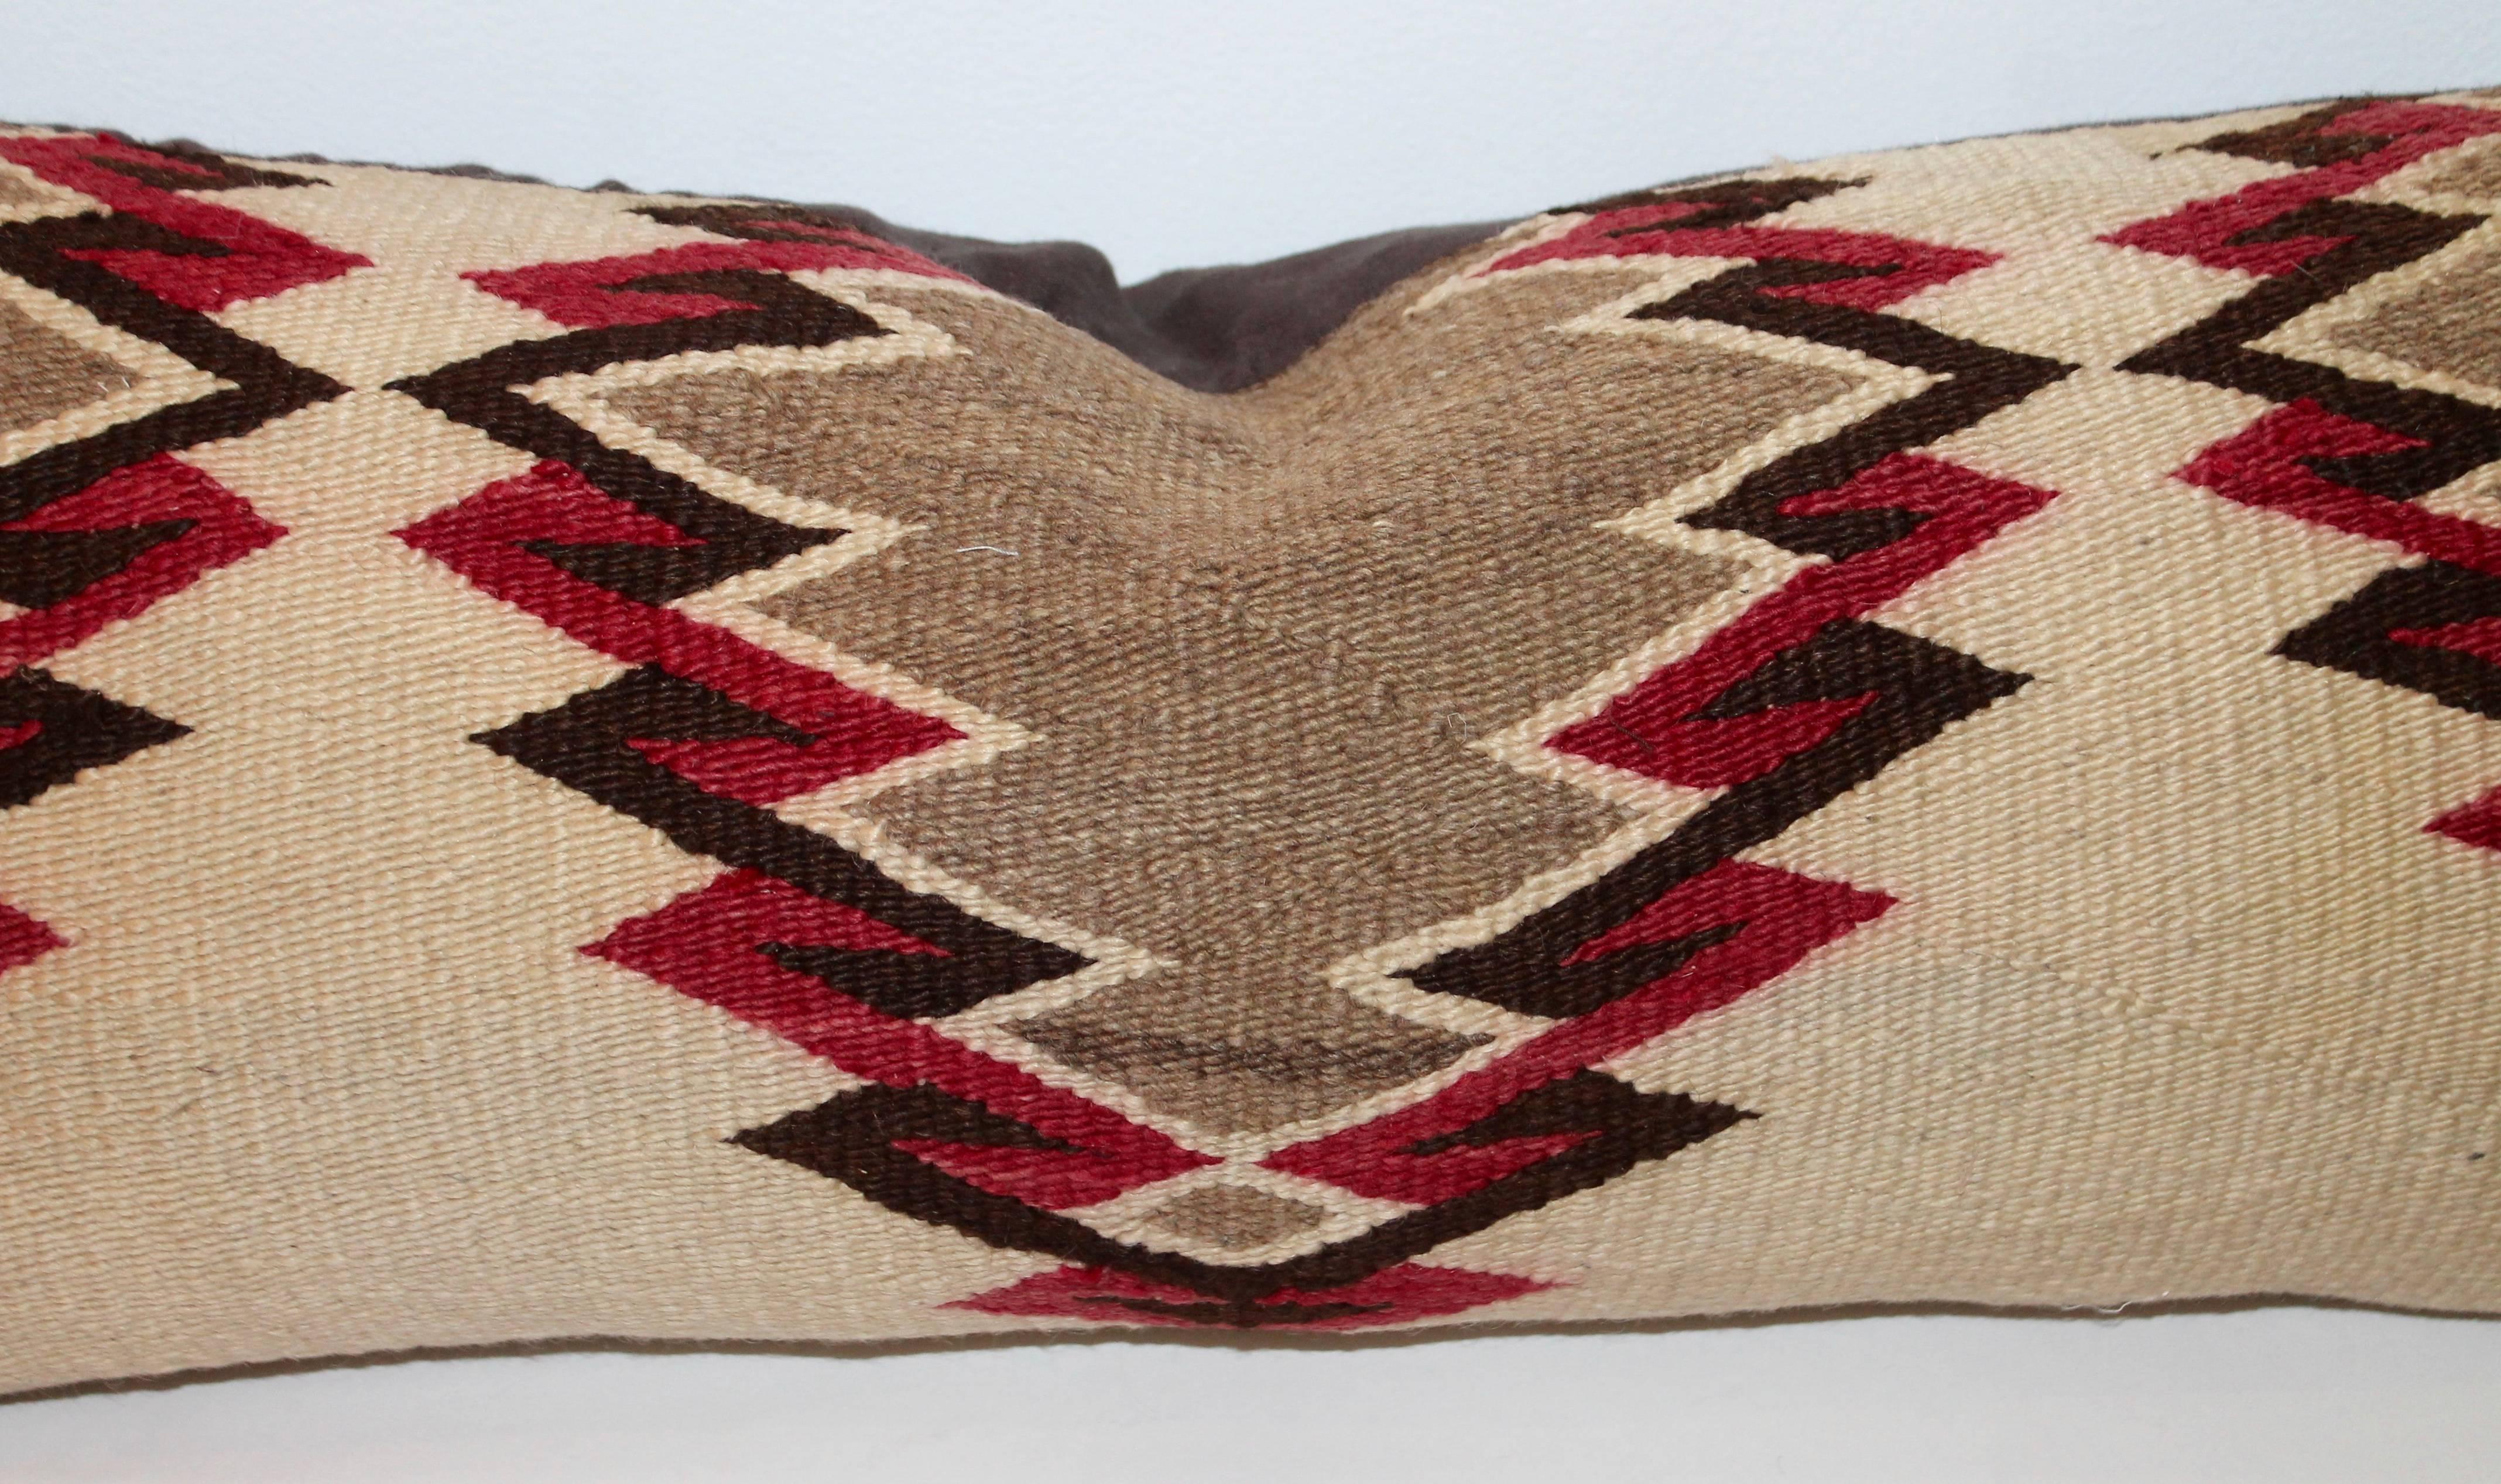 This fine Navajo weaving is in great condition and most unusual colors. The backing is in a chocolate brown cotton linen.